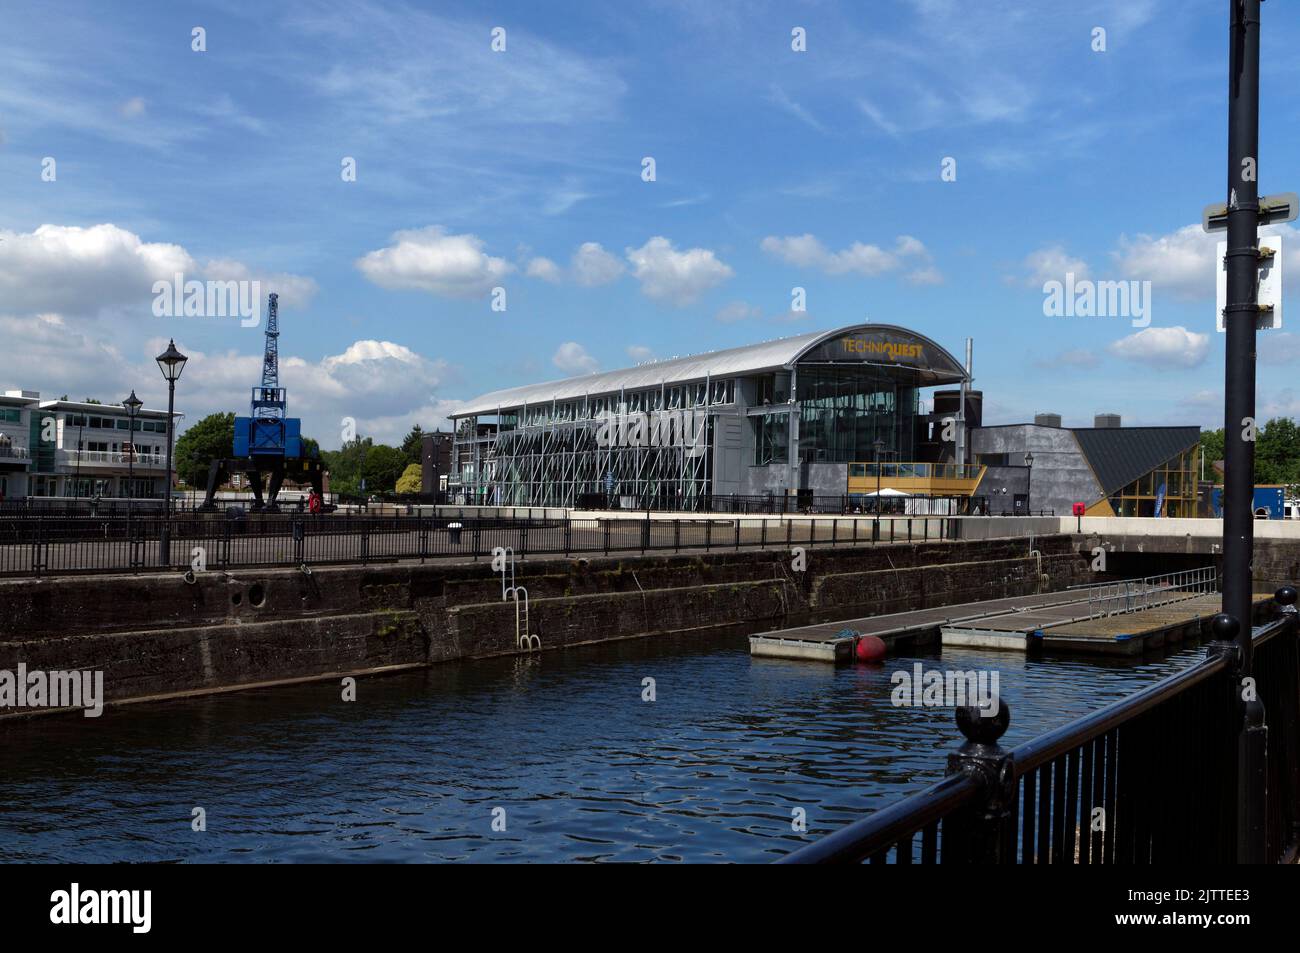 Techniquest cardiff bay cardiff wales hi-res stock photography and images -  Alamy